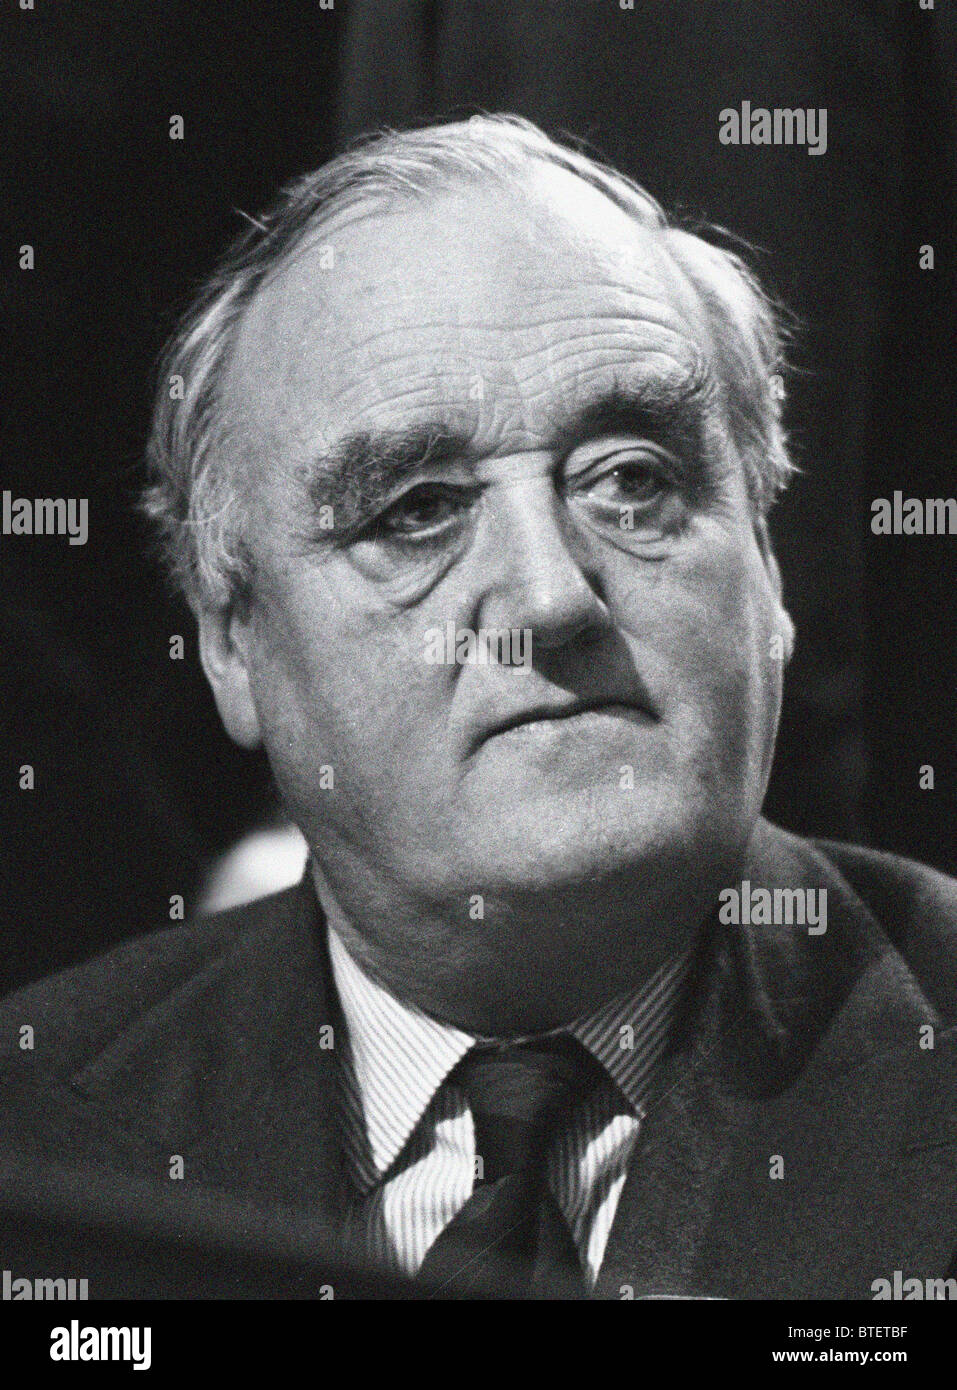 William Stephen Ian Whitelaw, 1st Viscount Whitelaw, KT, CH, MC, PC, DL (28 June, 1918 – 1 July, 1999), pictured in 1982 Stock Photo